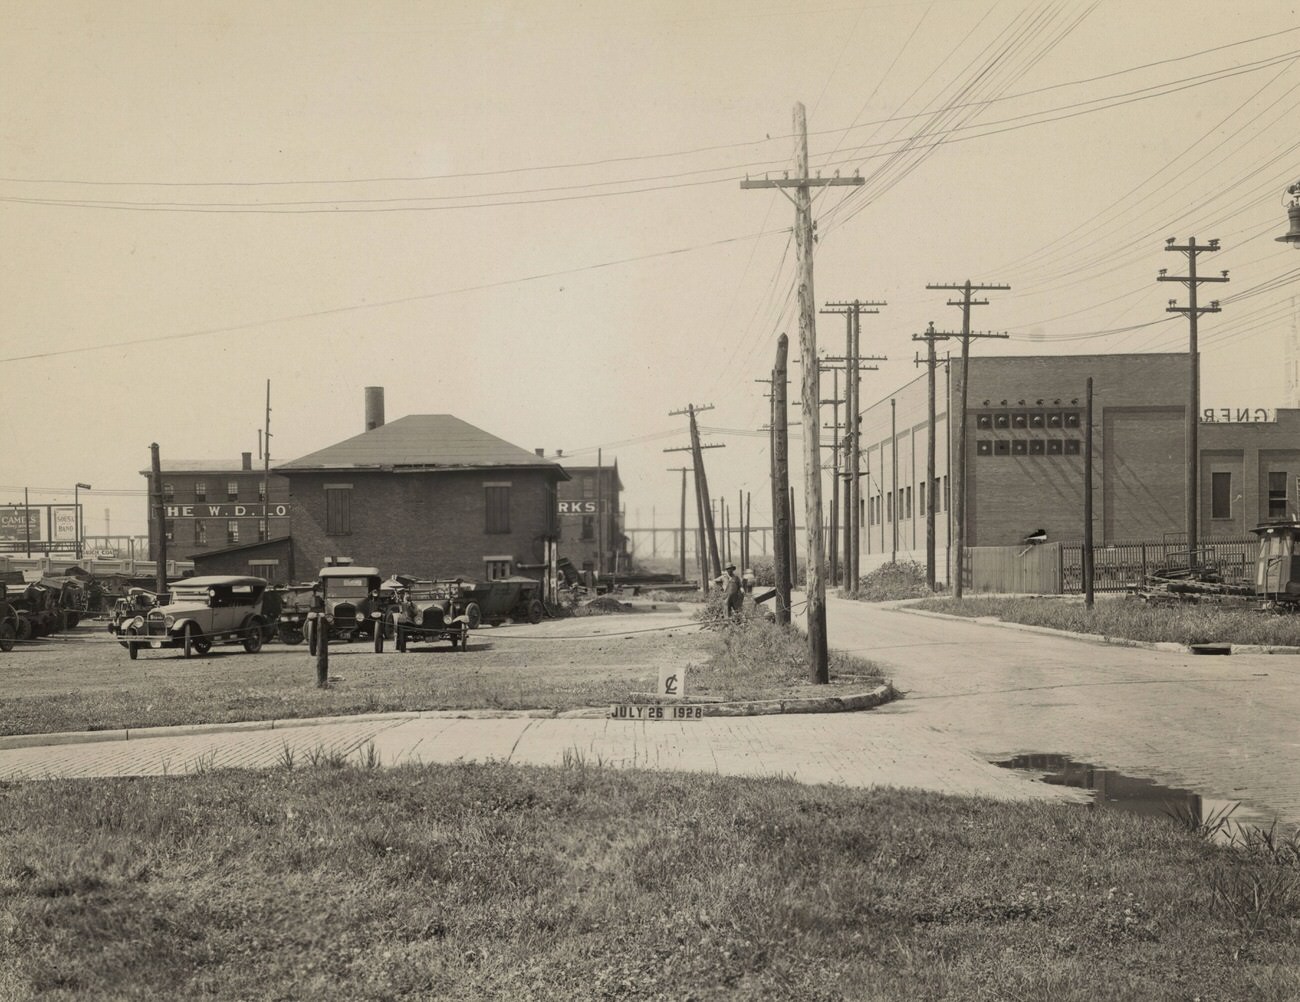 City garage south of Mound Street and west of Short Street, featuring W. D. Lowe Machine & Engine Works and Wagner Awning Company, July 26, 1928.